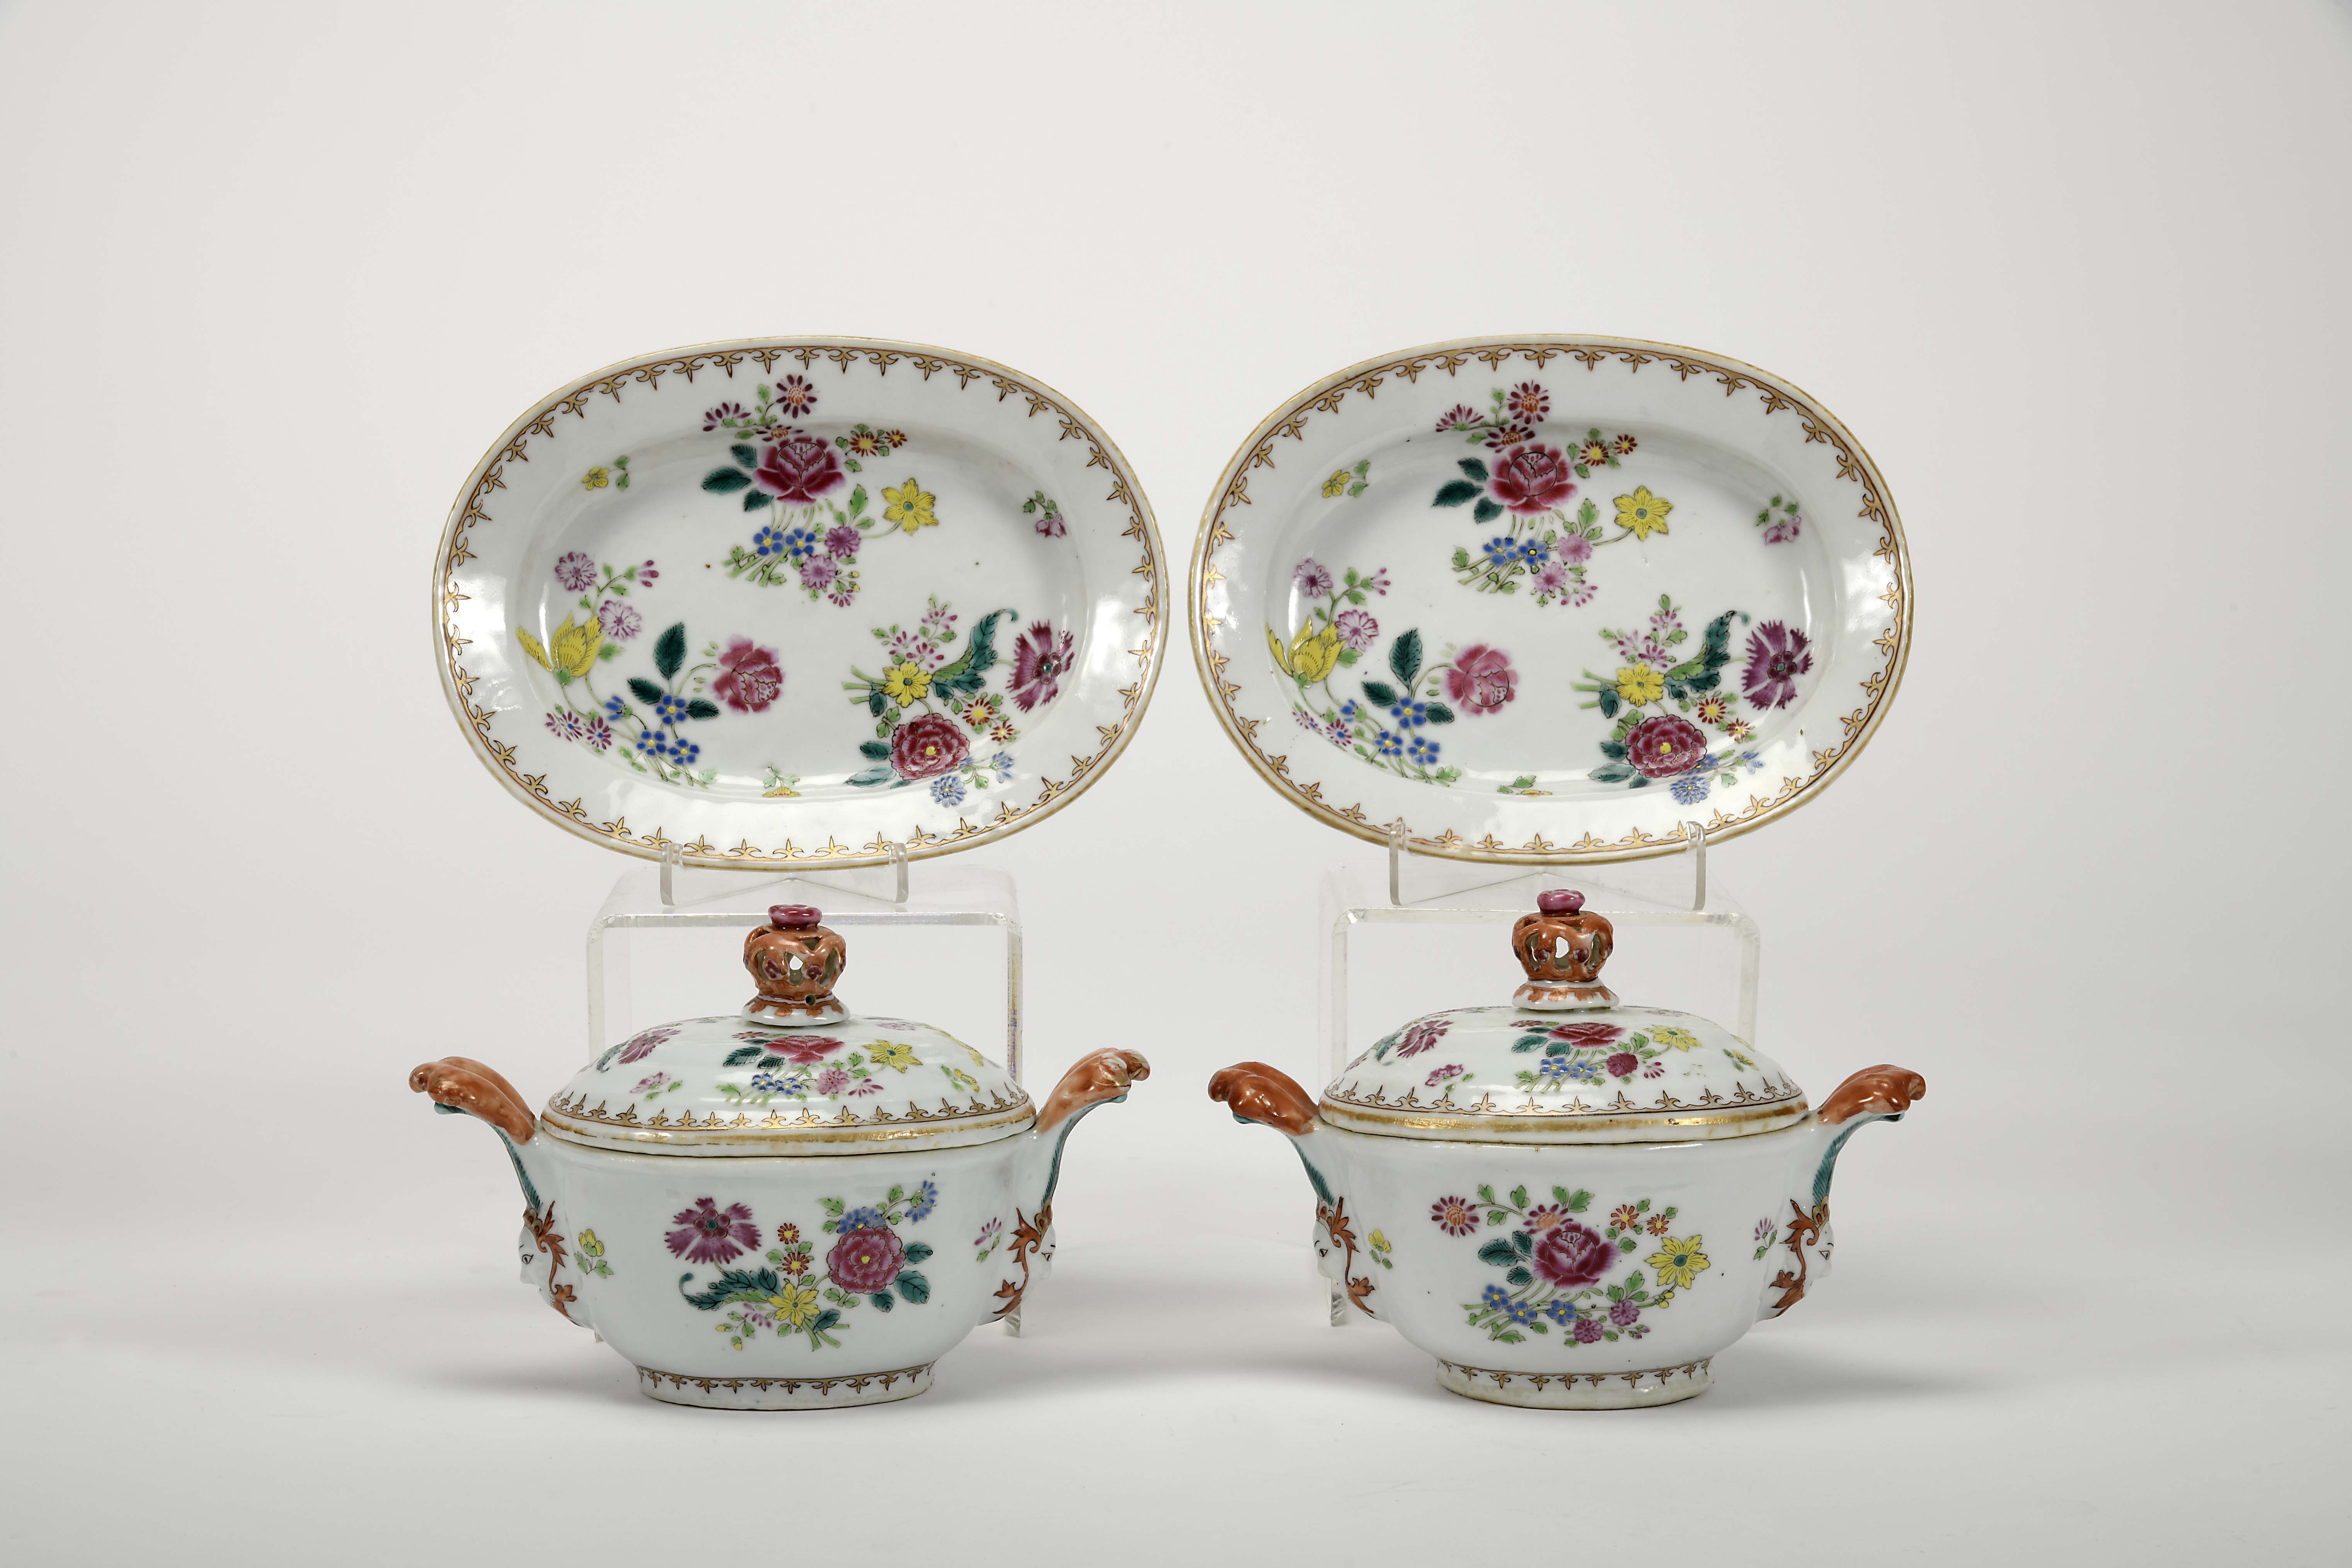 A pair of small tureens with stands - Image 4 of 5